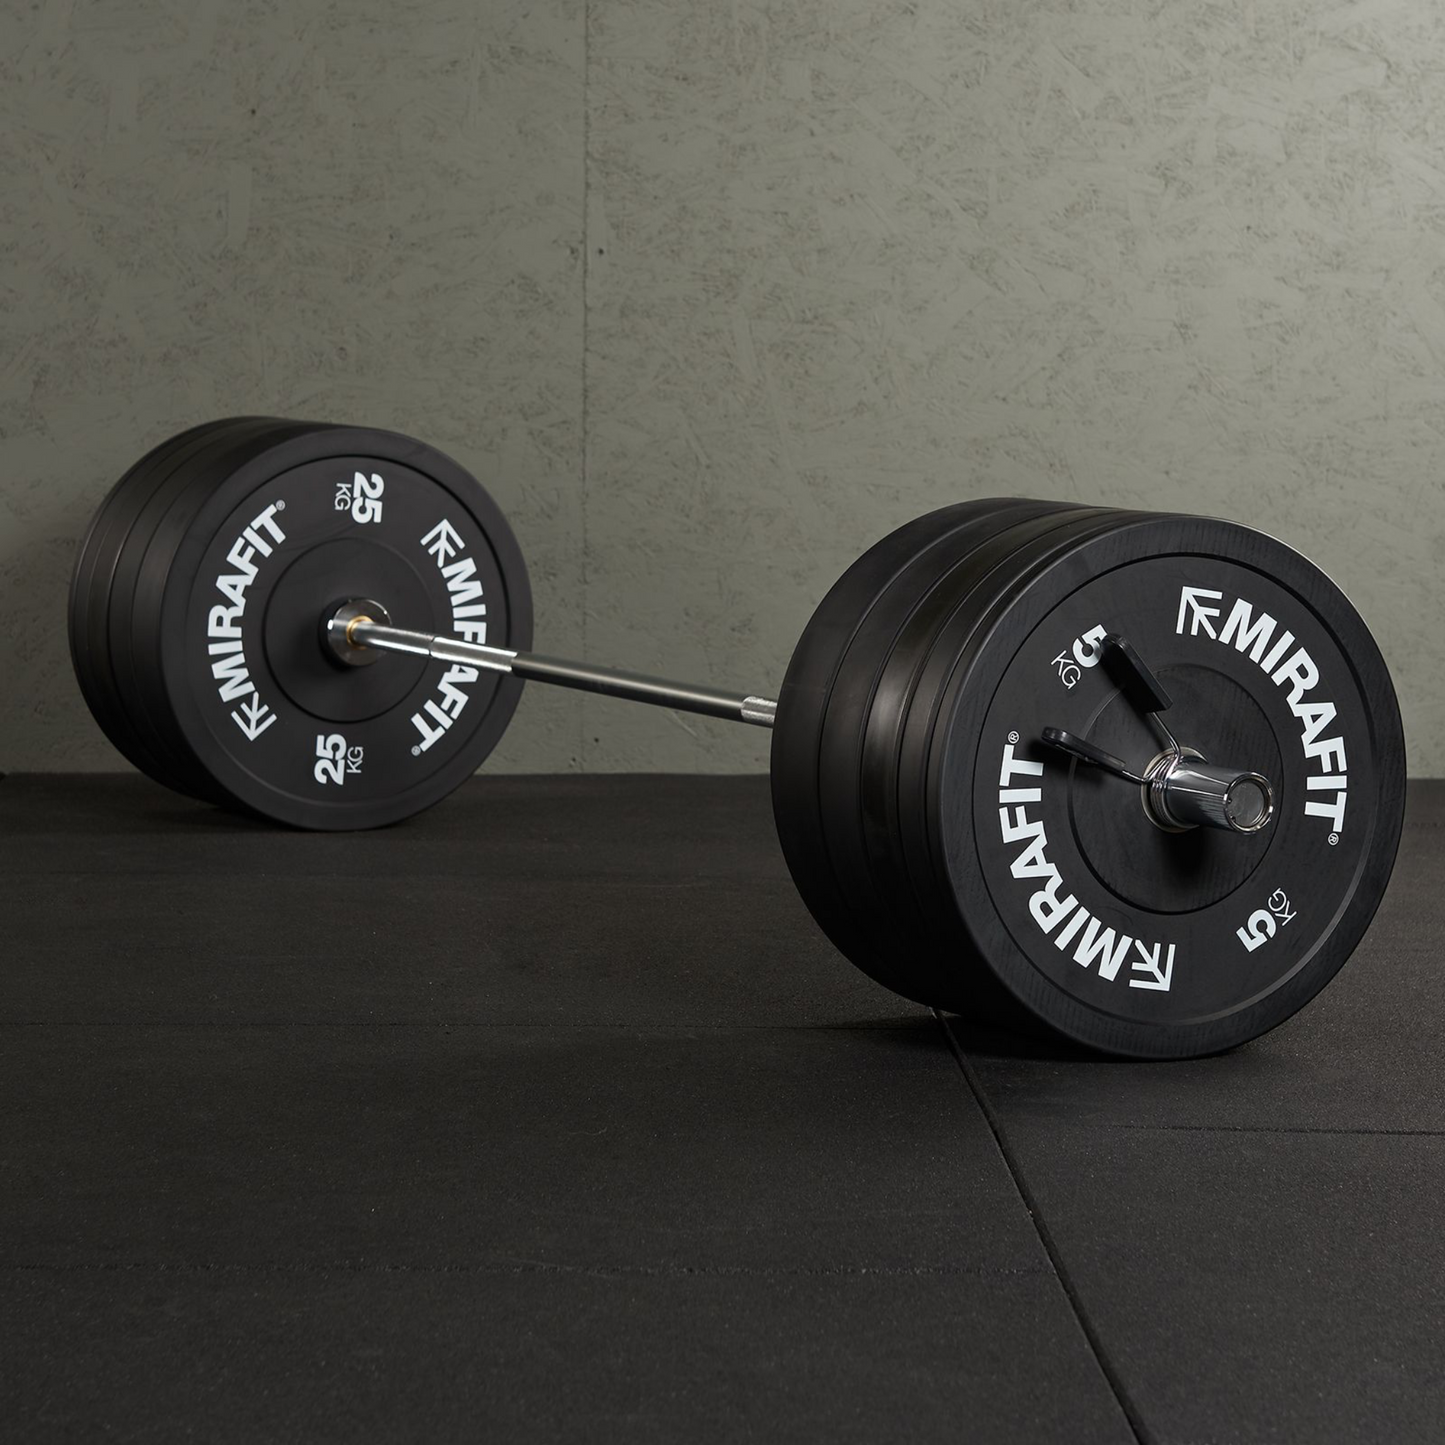 Mirafit Olympic Barbell & Weight Set